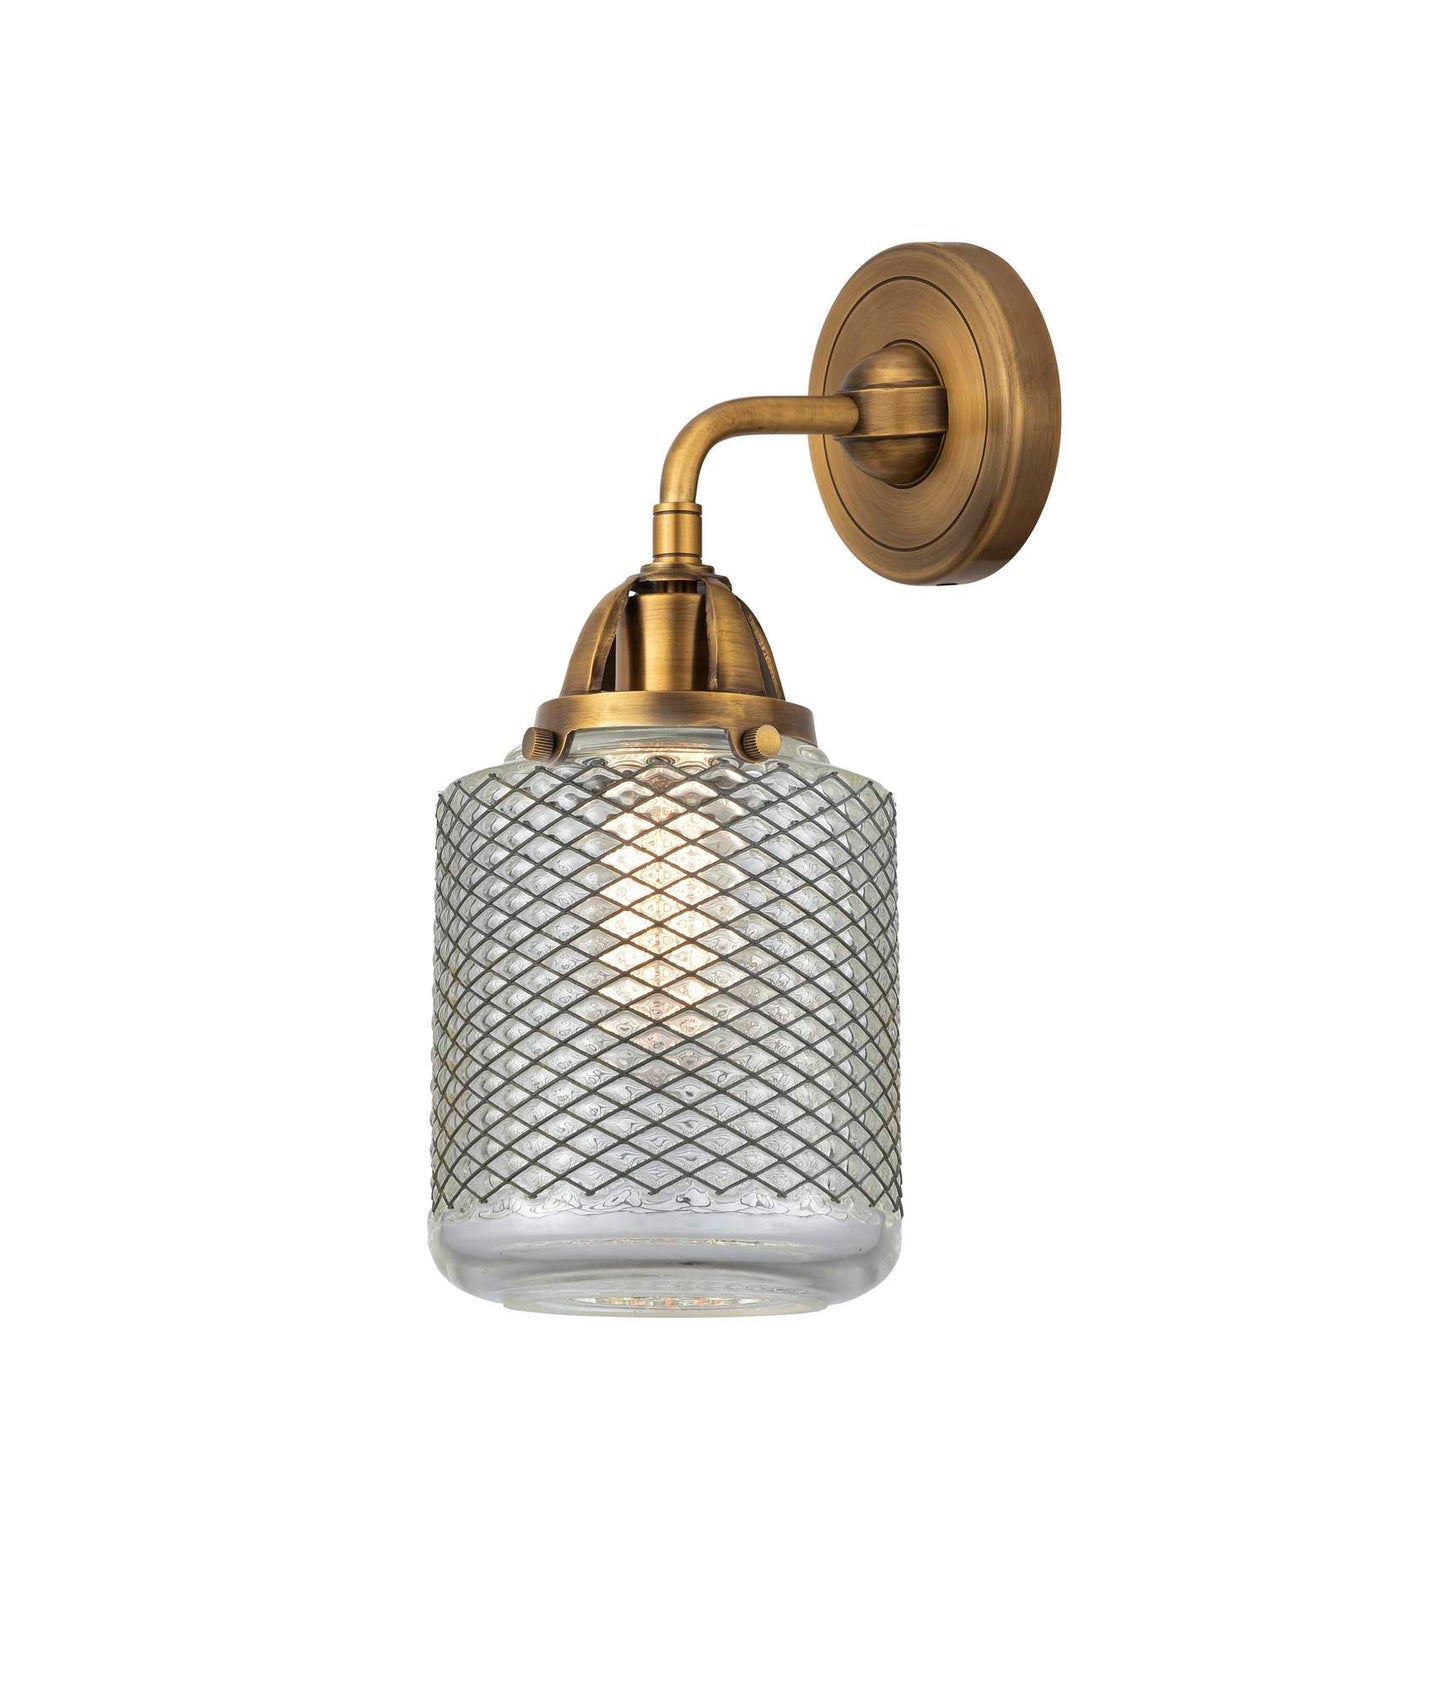 288-1W-BB-G262 1-Light 6" Brushed Brass Sconce - Vintage Wire Mesh Stanton Glass - LED Bulb - Dimmensions: 6 x 7.25 x 12.125 - Glass Up or Down: Yes